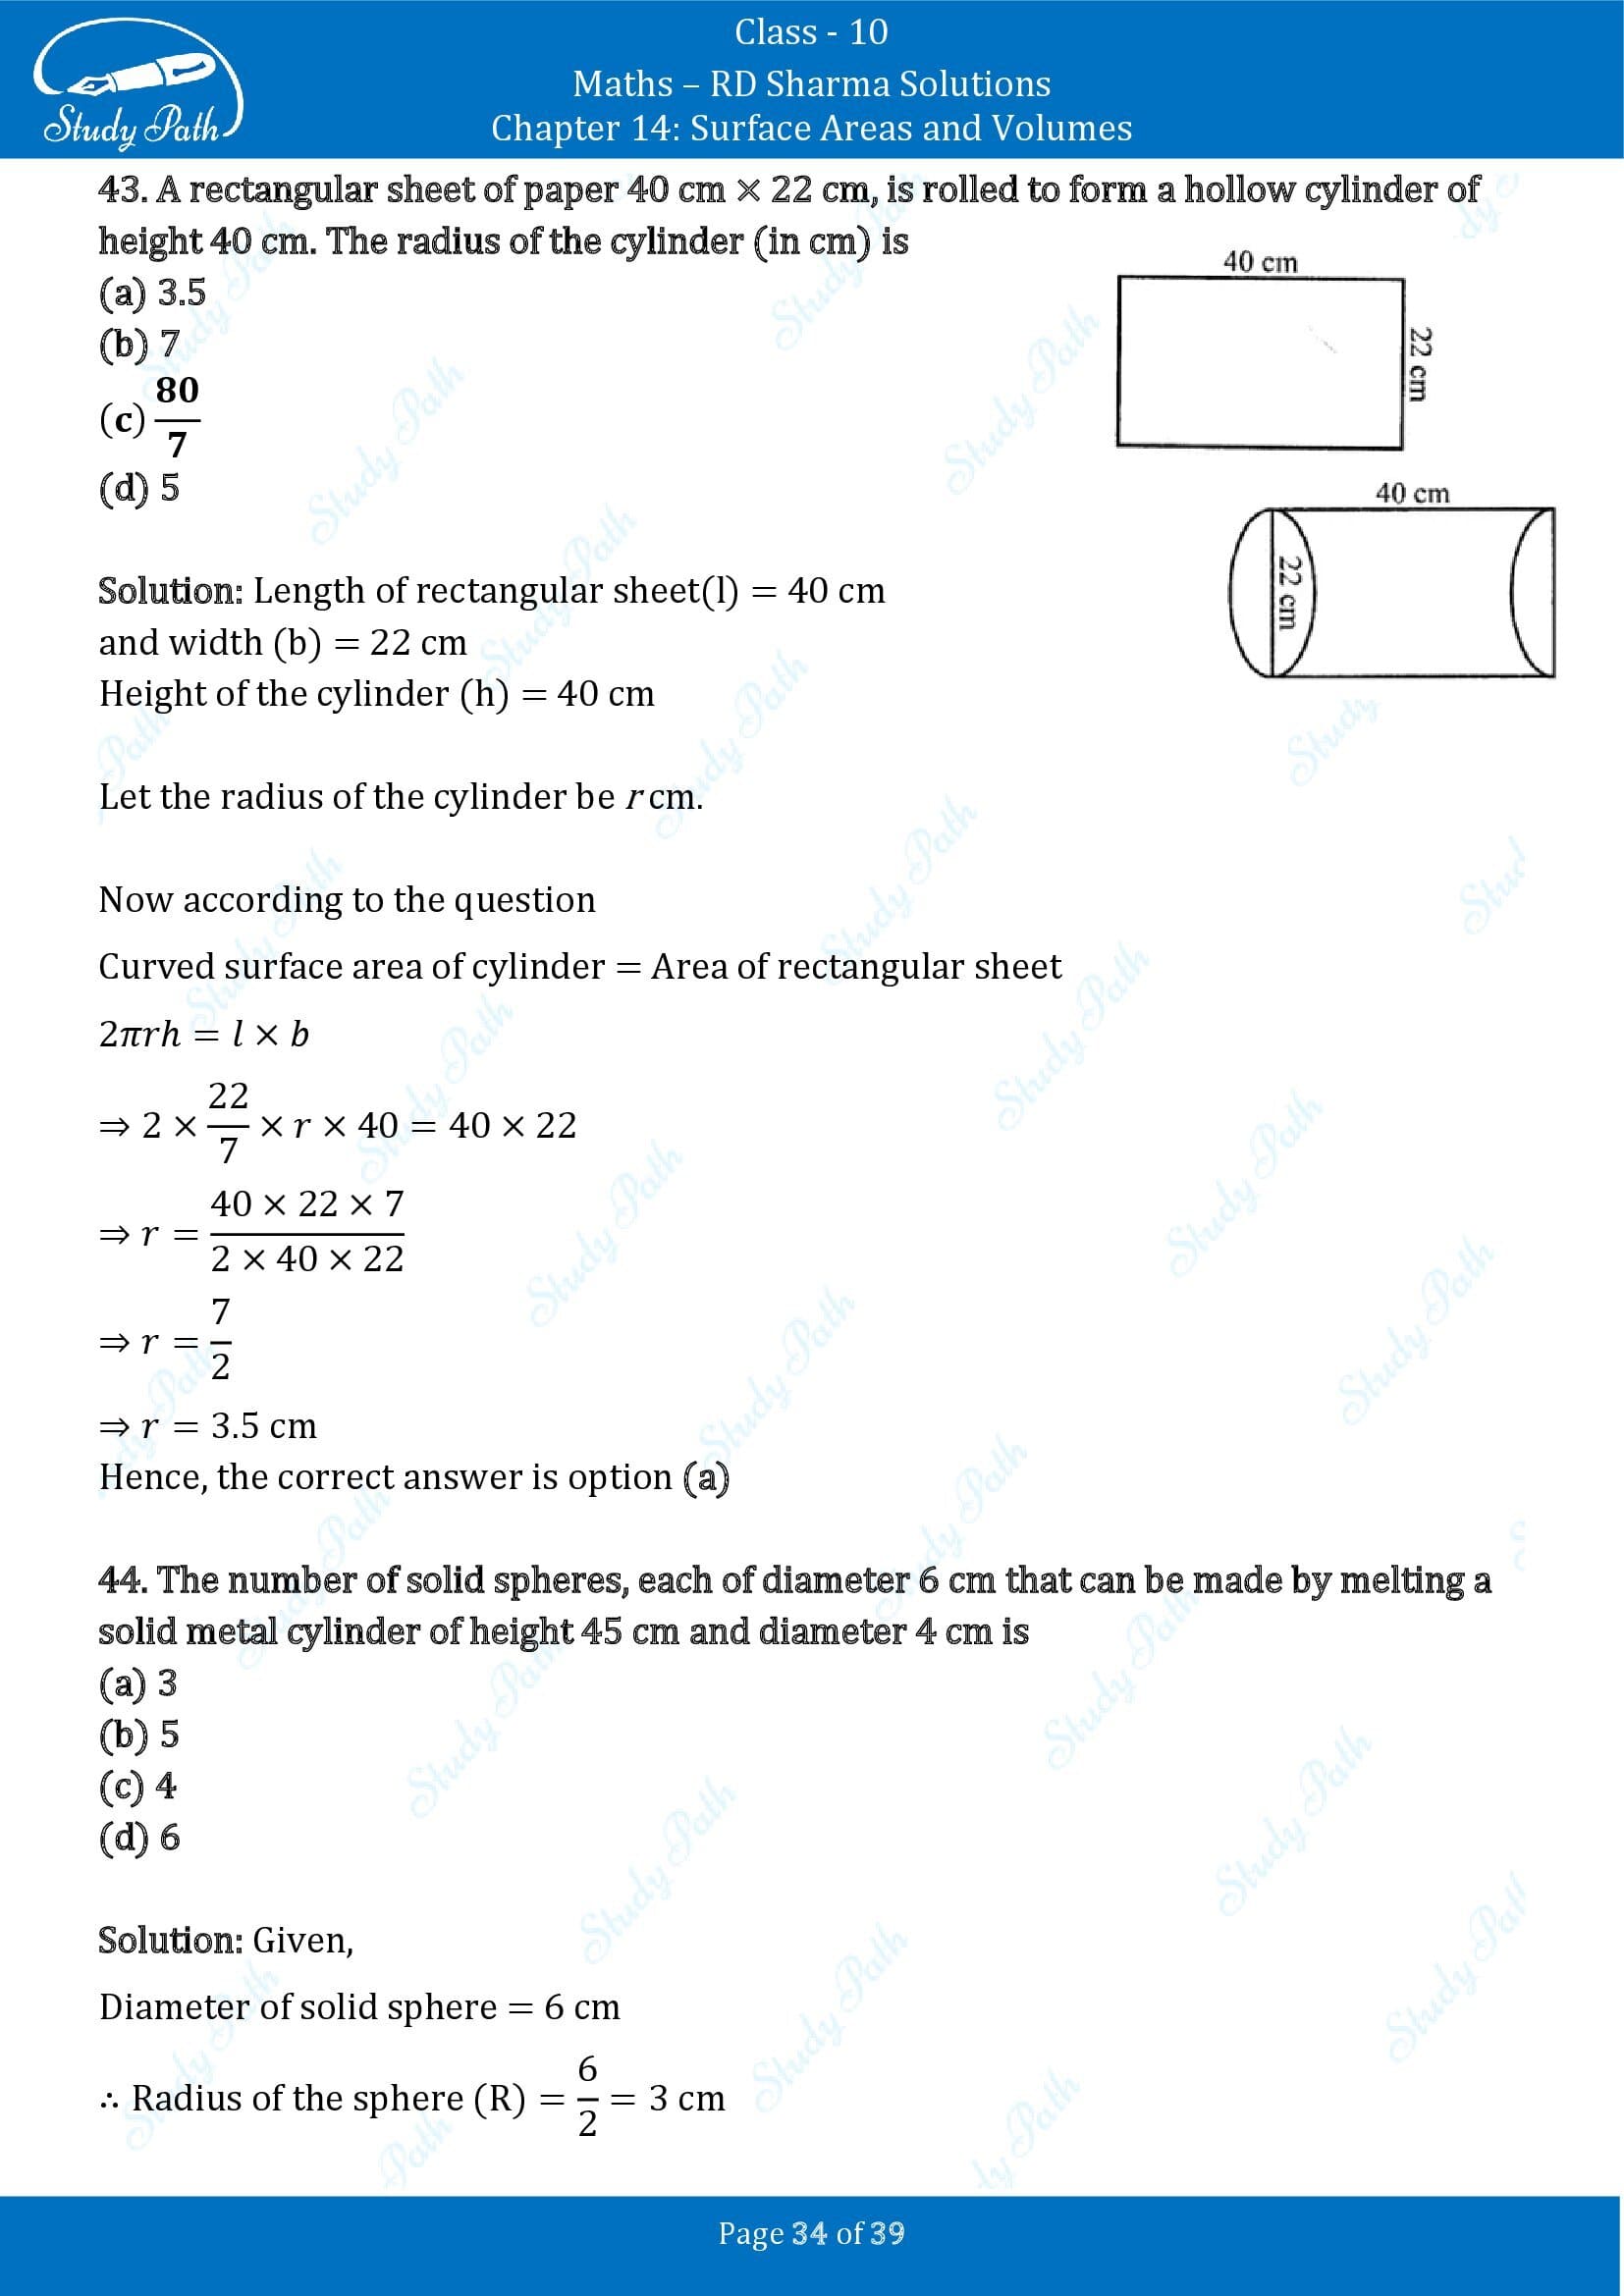 RD Sharma Solutions Class 10 Chapter 14 Surface Areas and Volumes Multiple Choice Question MCQs 00034